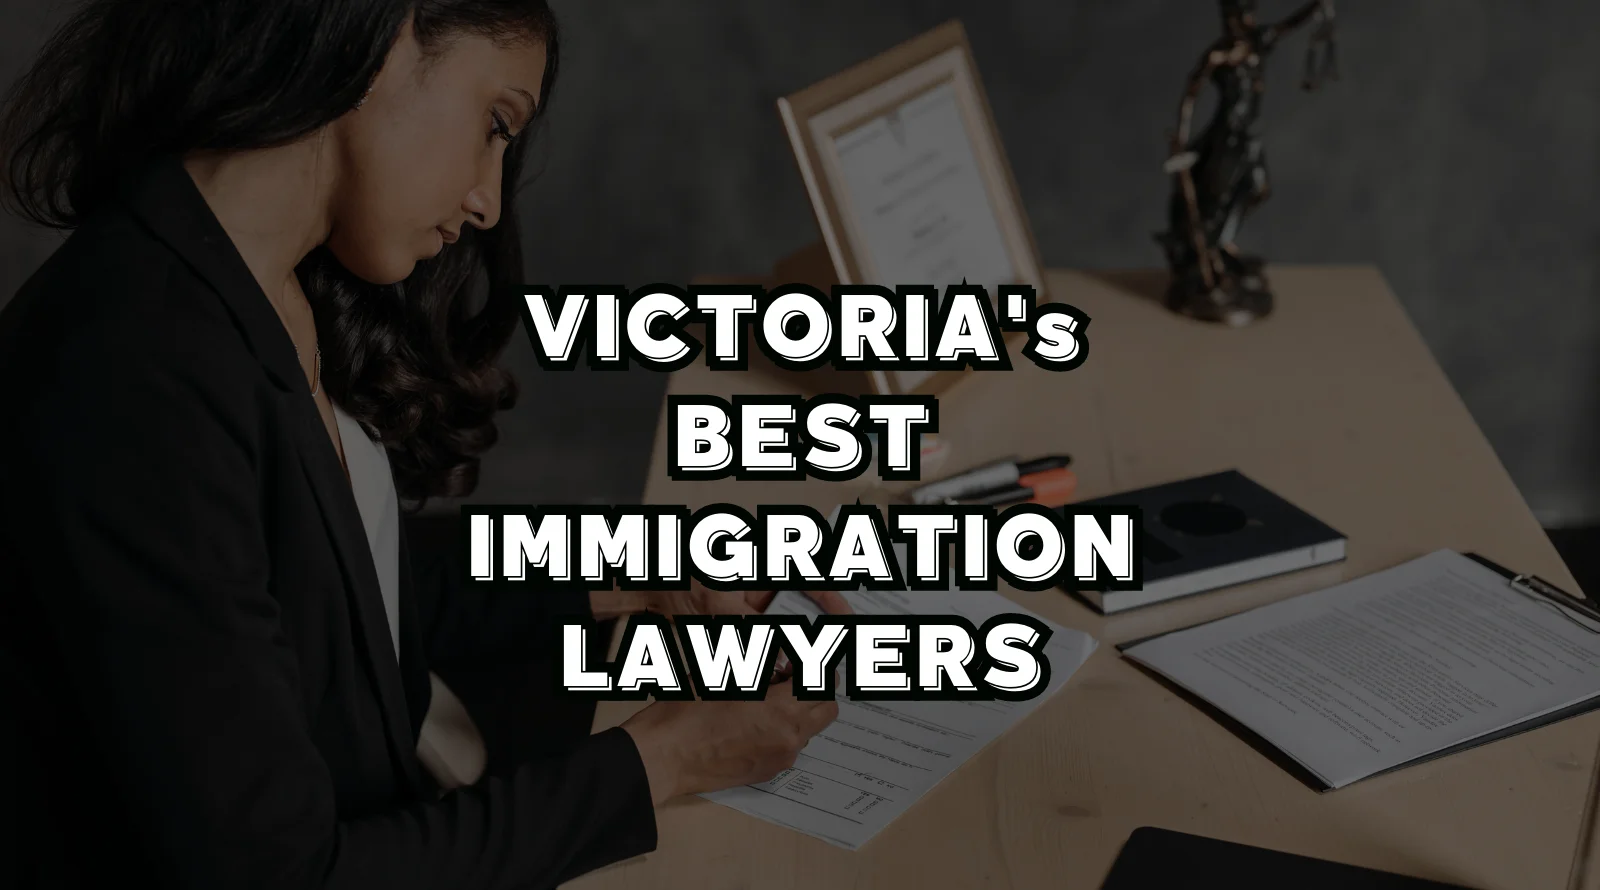 Best Immigration Lawyers in Victoria, BC